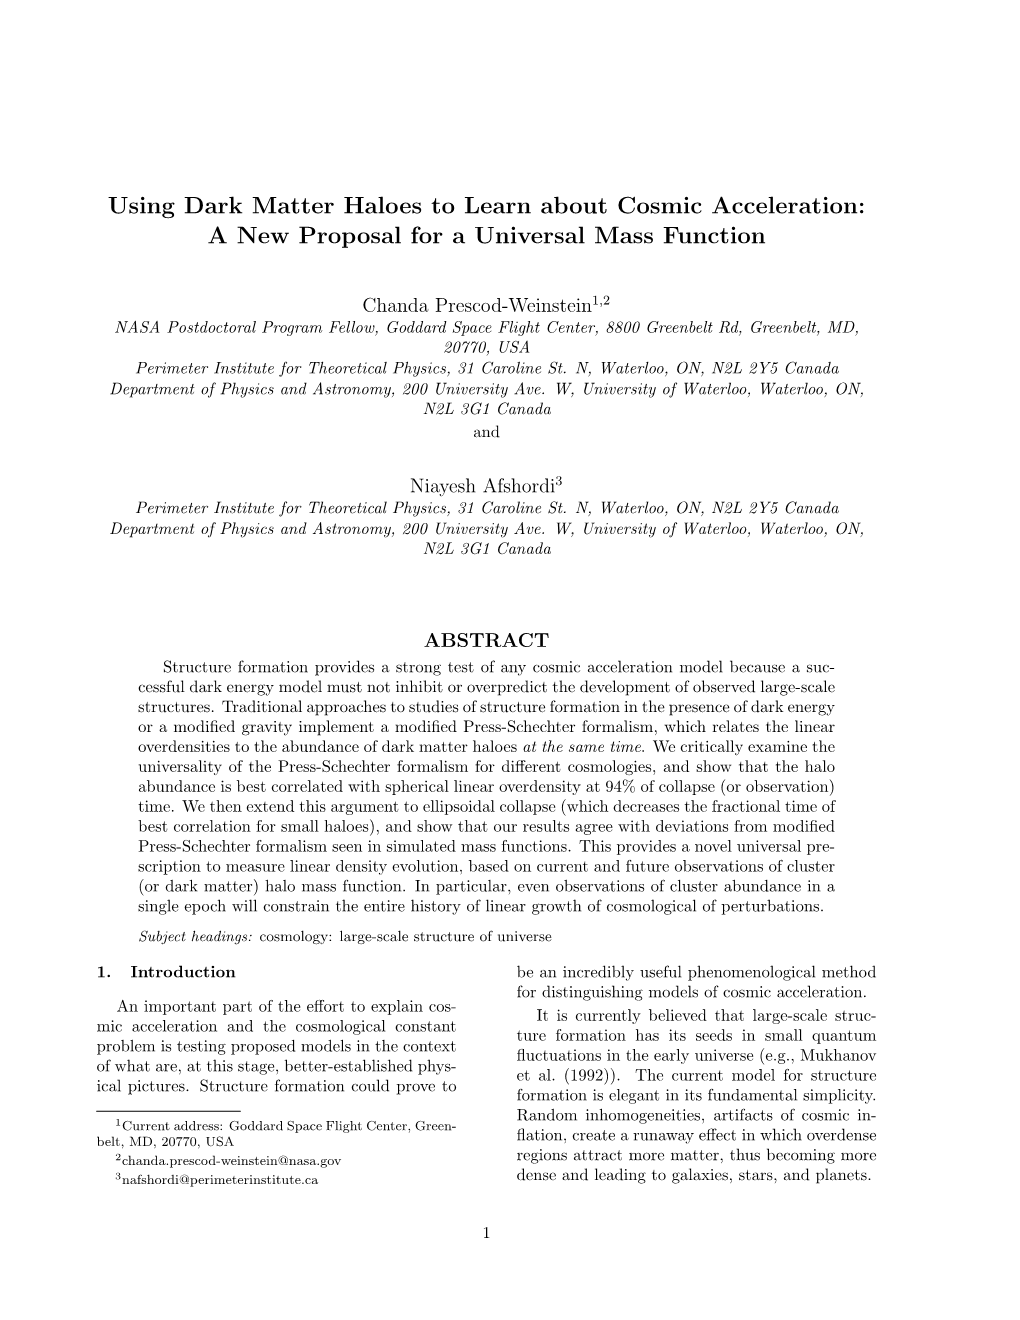 Using Dark Matter Haloes to Learn About Cosmic Acceleration: a New Proposal for a Universal Mass Function